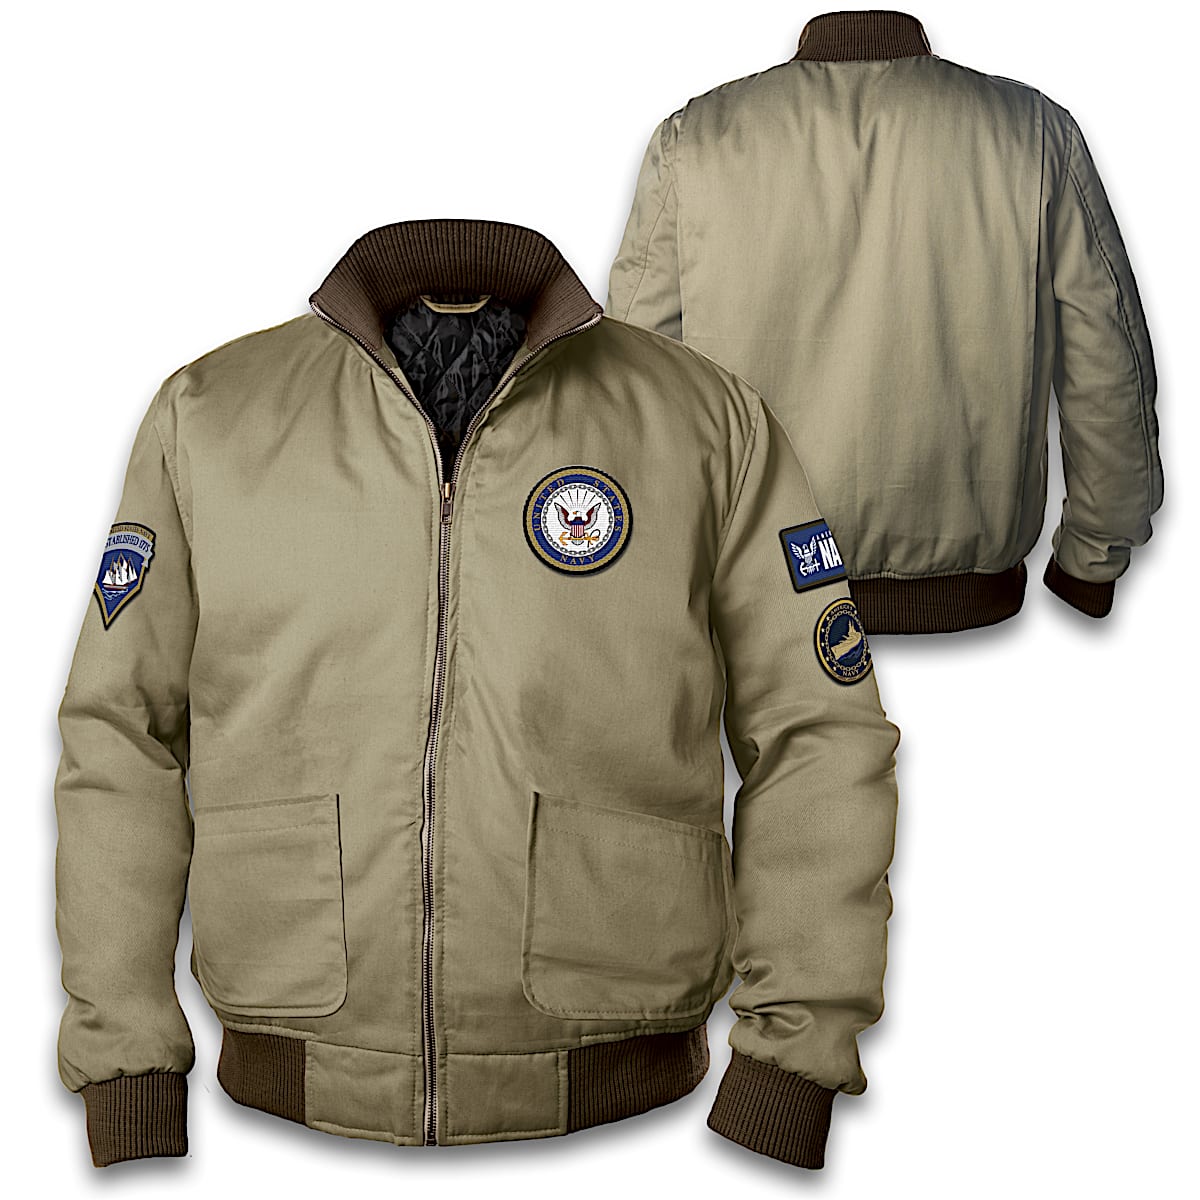 Jacket Patches for Men 